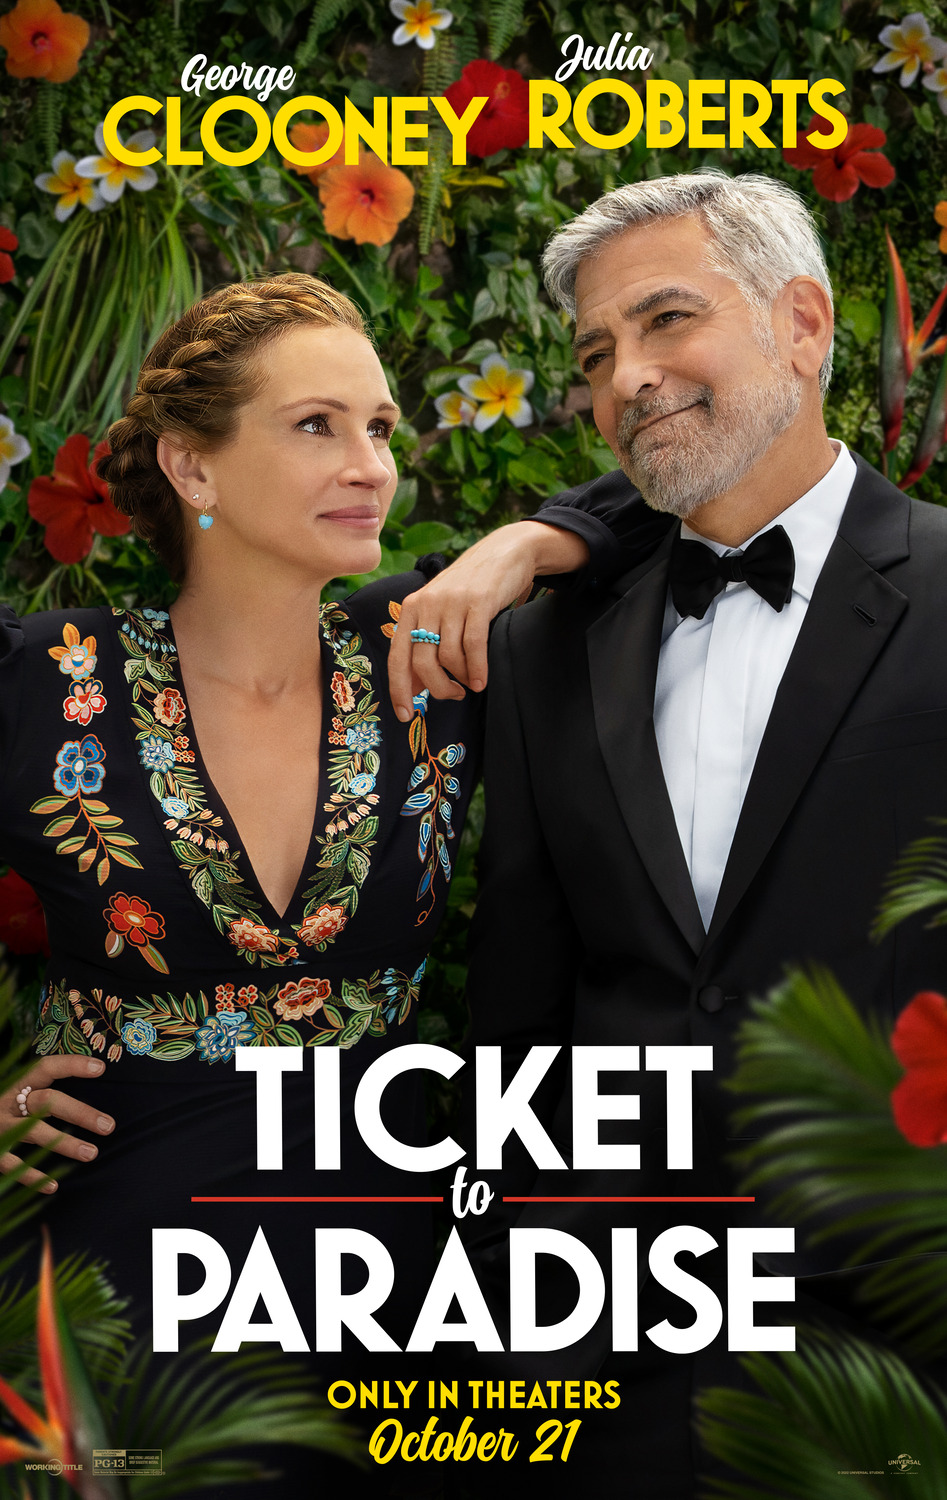 Ticket to Paradise poster starring George Clooney, Julia Roberts